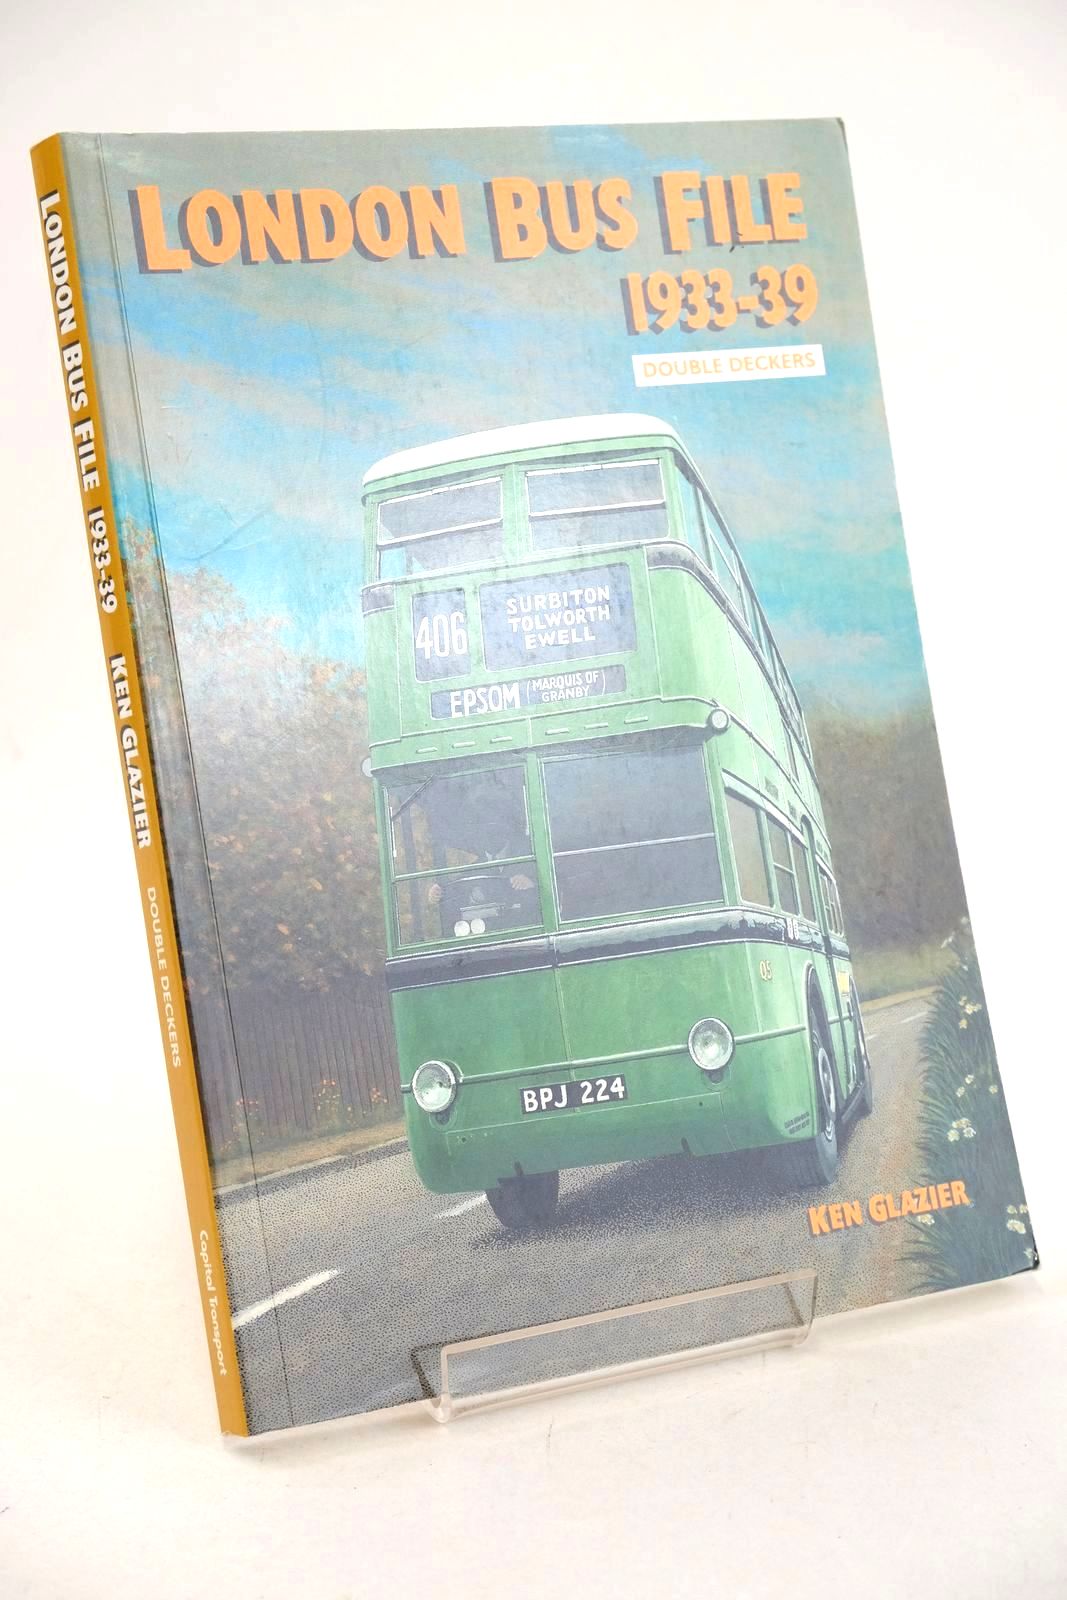 Photo of LONDON BUS FILE 1933-39: DOUBLE DECKERS written by Glazier, Ken published by Capital Transport (STOCK CODE: 1326928)  for sale by Stella & Rose's Books